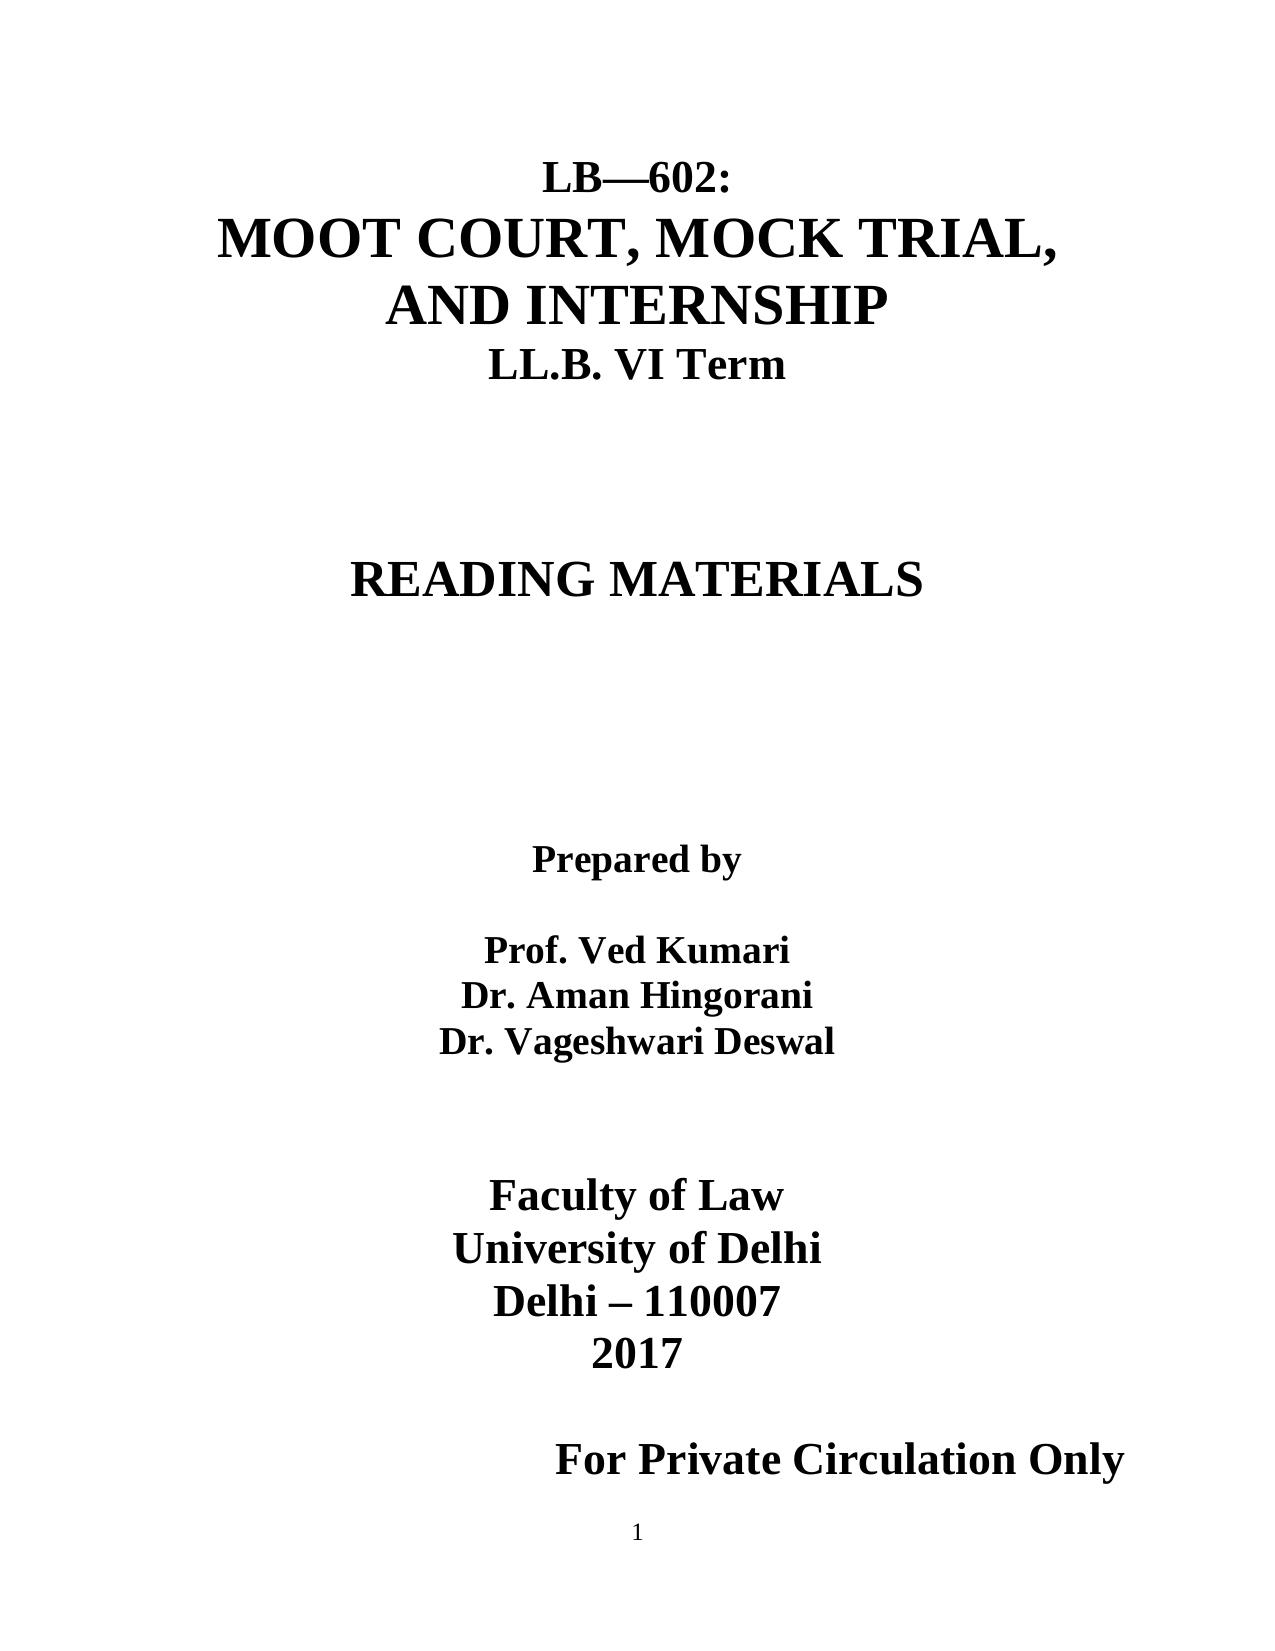 Moot Court Mock Trial and Internshipl 2017